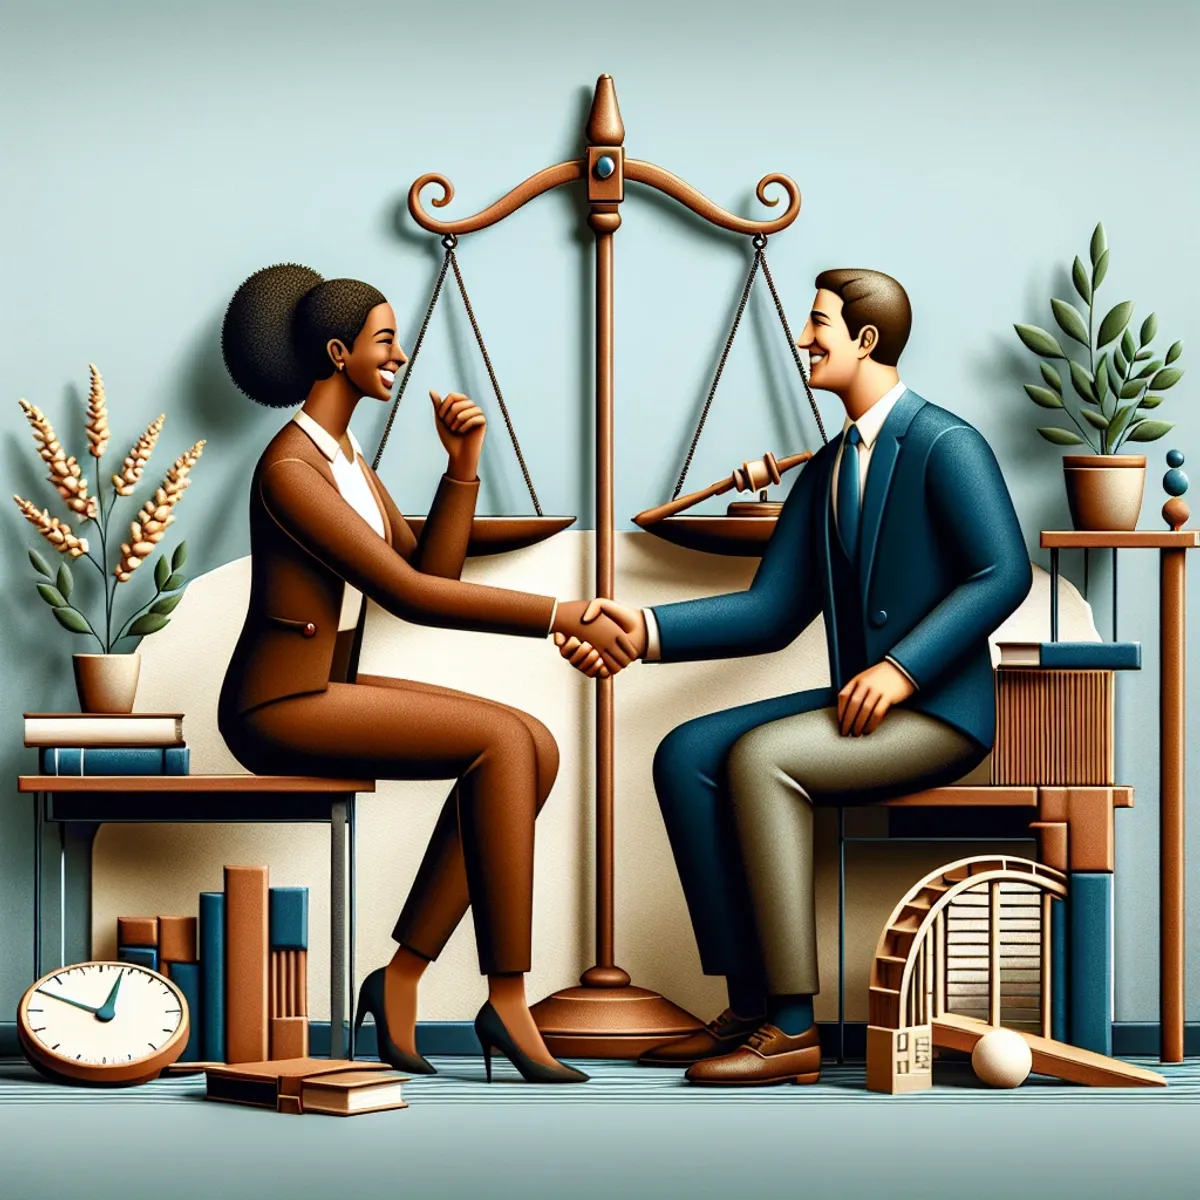 A Black female and a Caucasian male share a warm handshake in a professional setting, surrounded by symbols of trust, understanding, and collaboration.